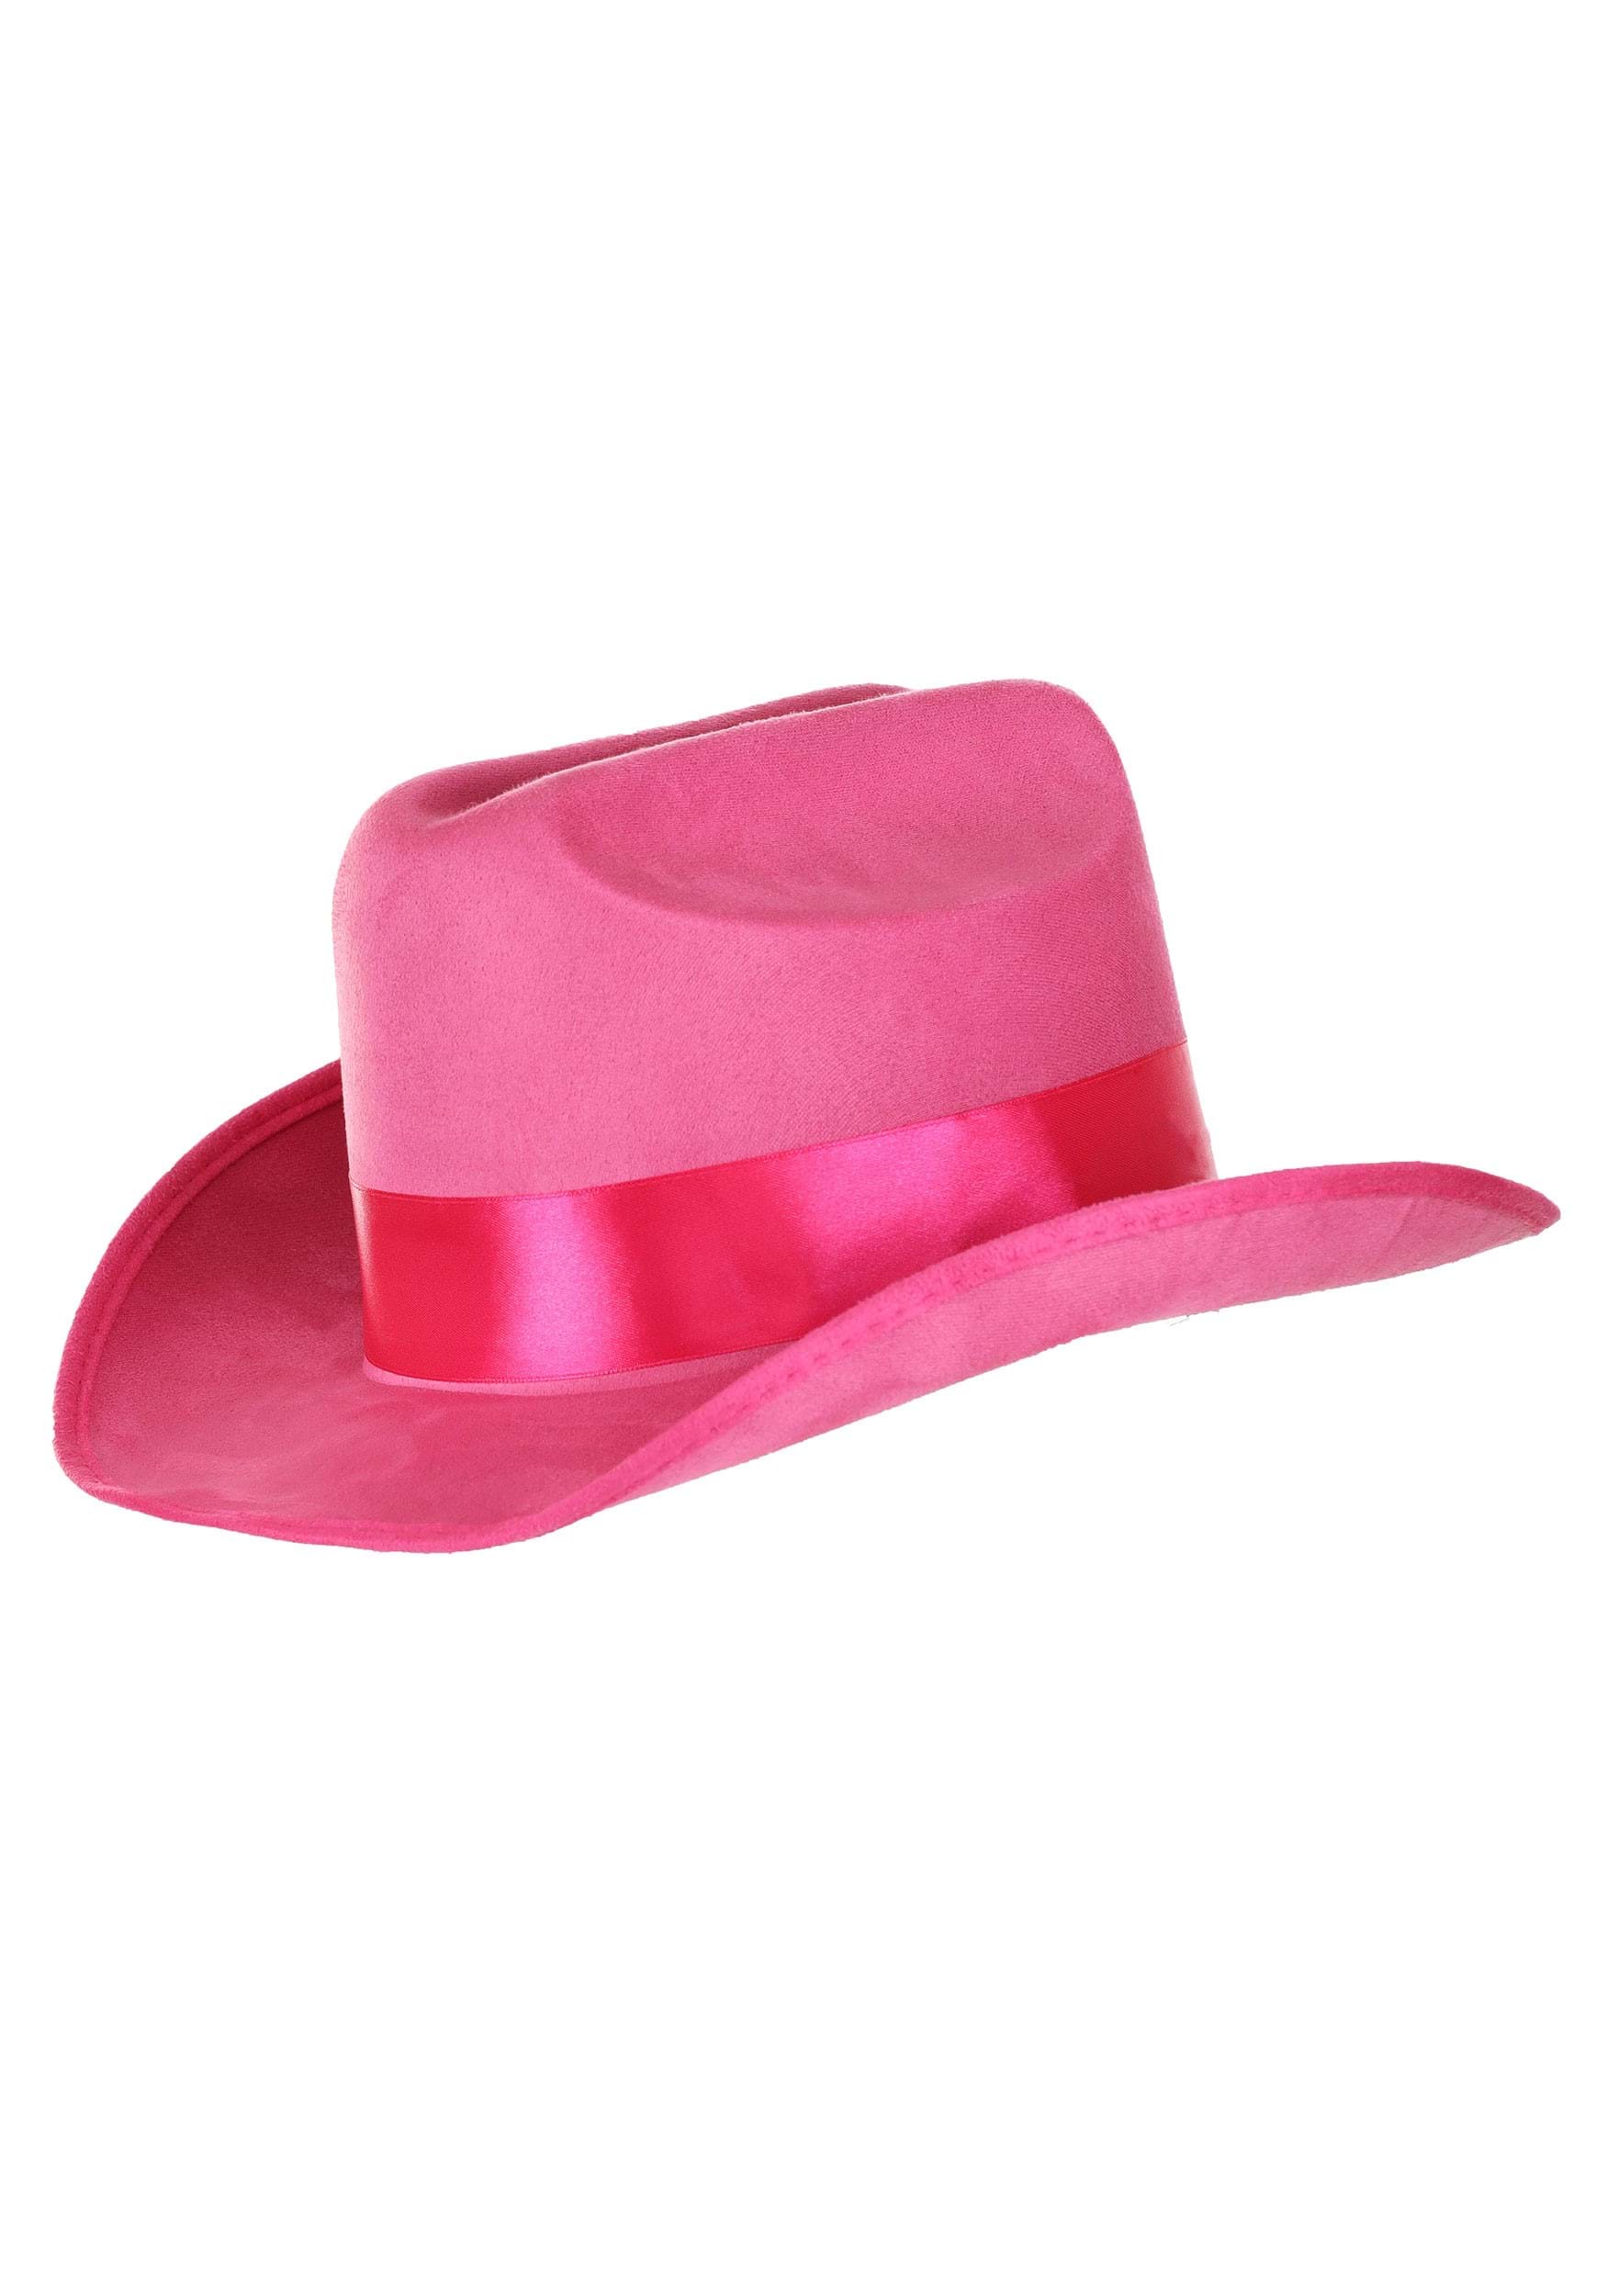 Girl’s Pink Cowboy Costume Hat